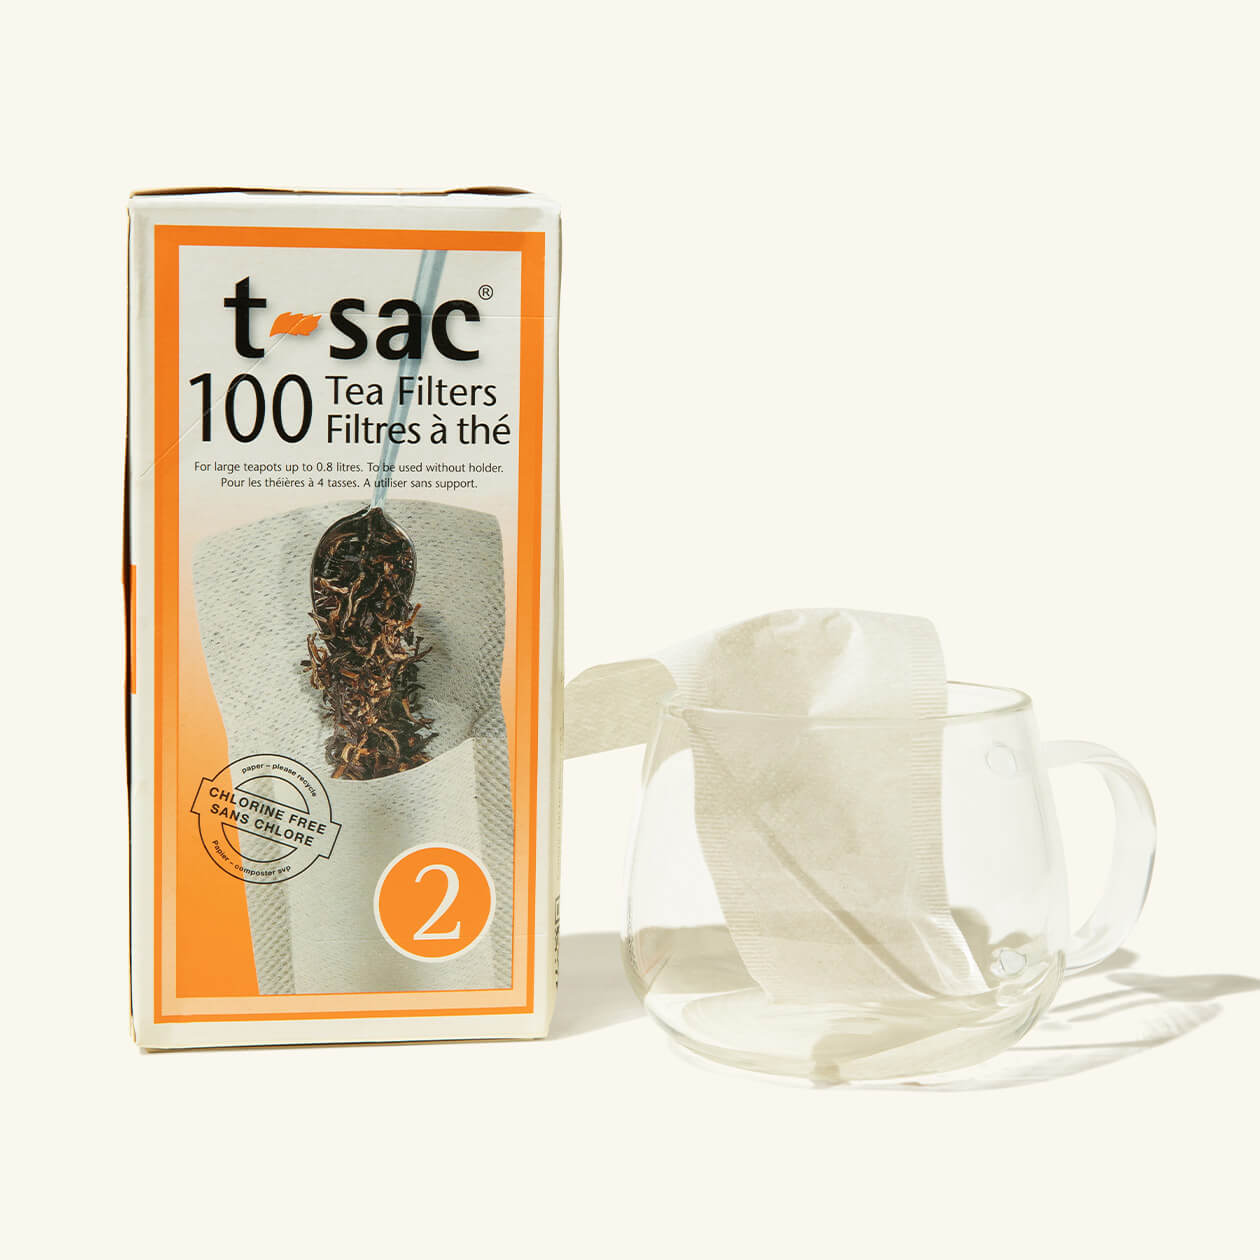 100 Count 100% Natural, Unbleached, and Chlorine Free Tea Filters